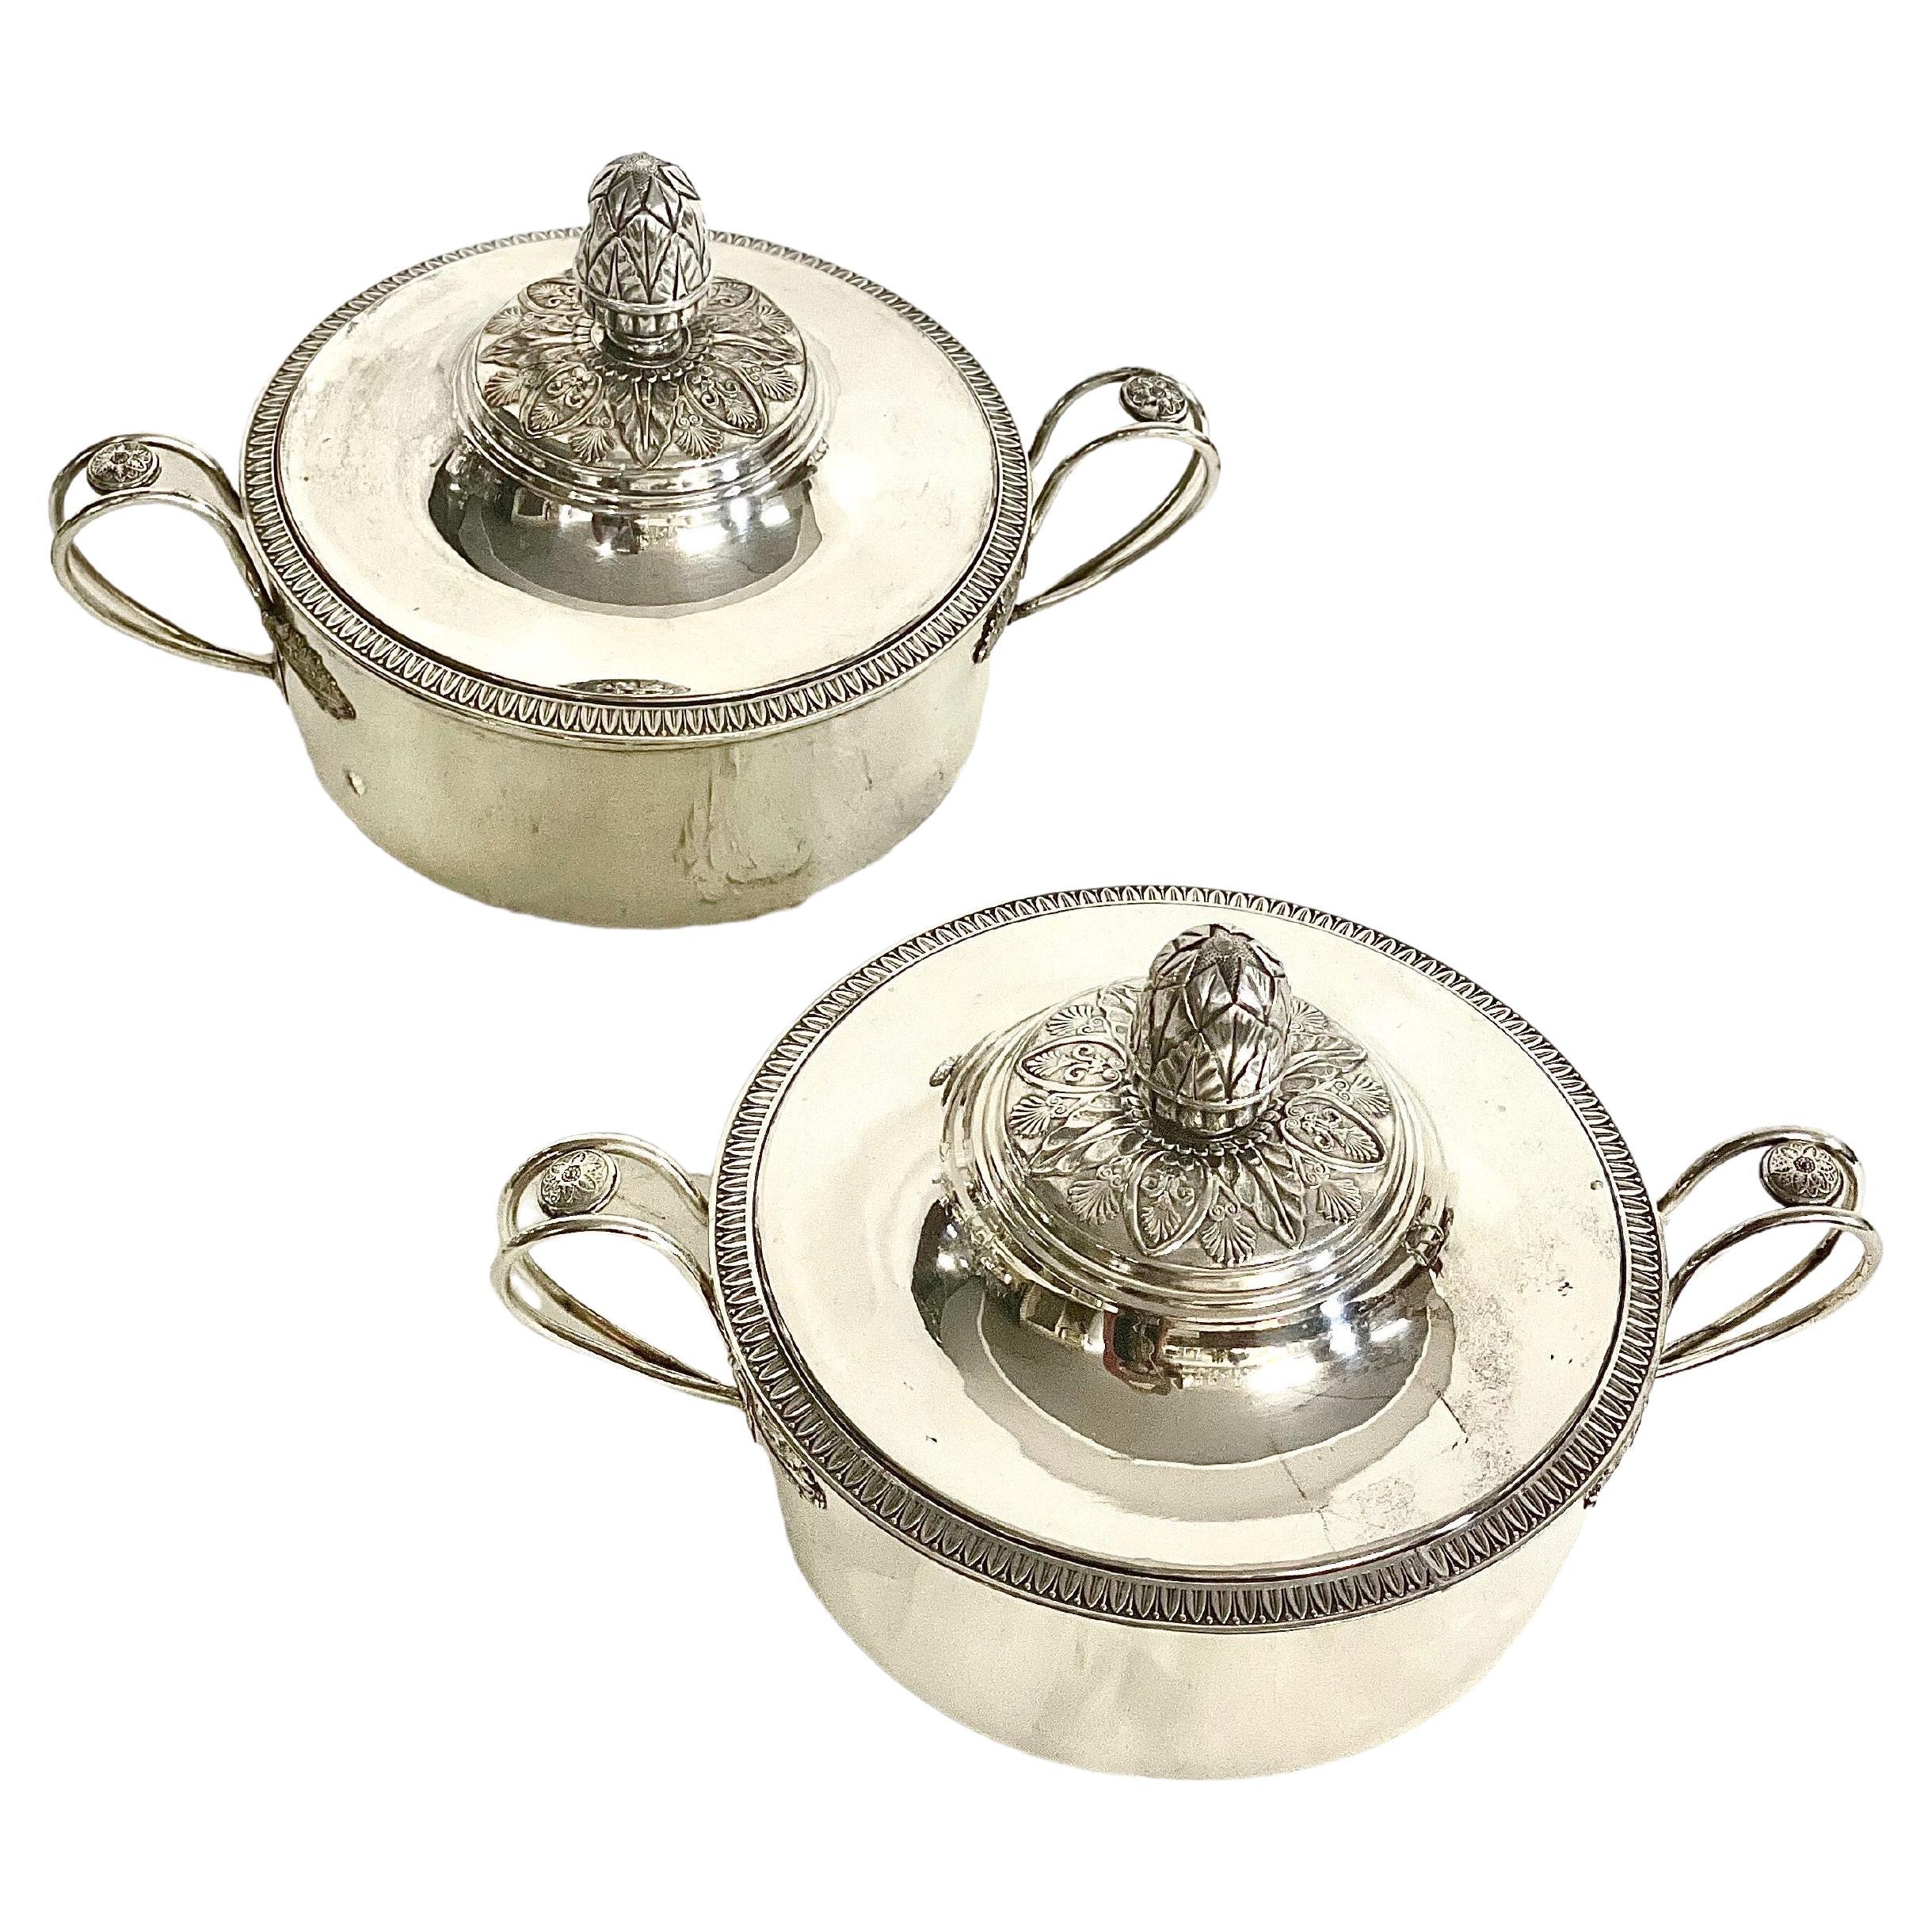 Pair of Silver Plated Vegetable or Soup Tureens